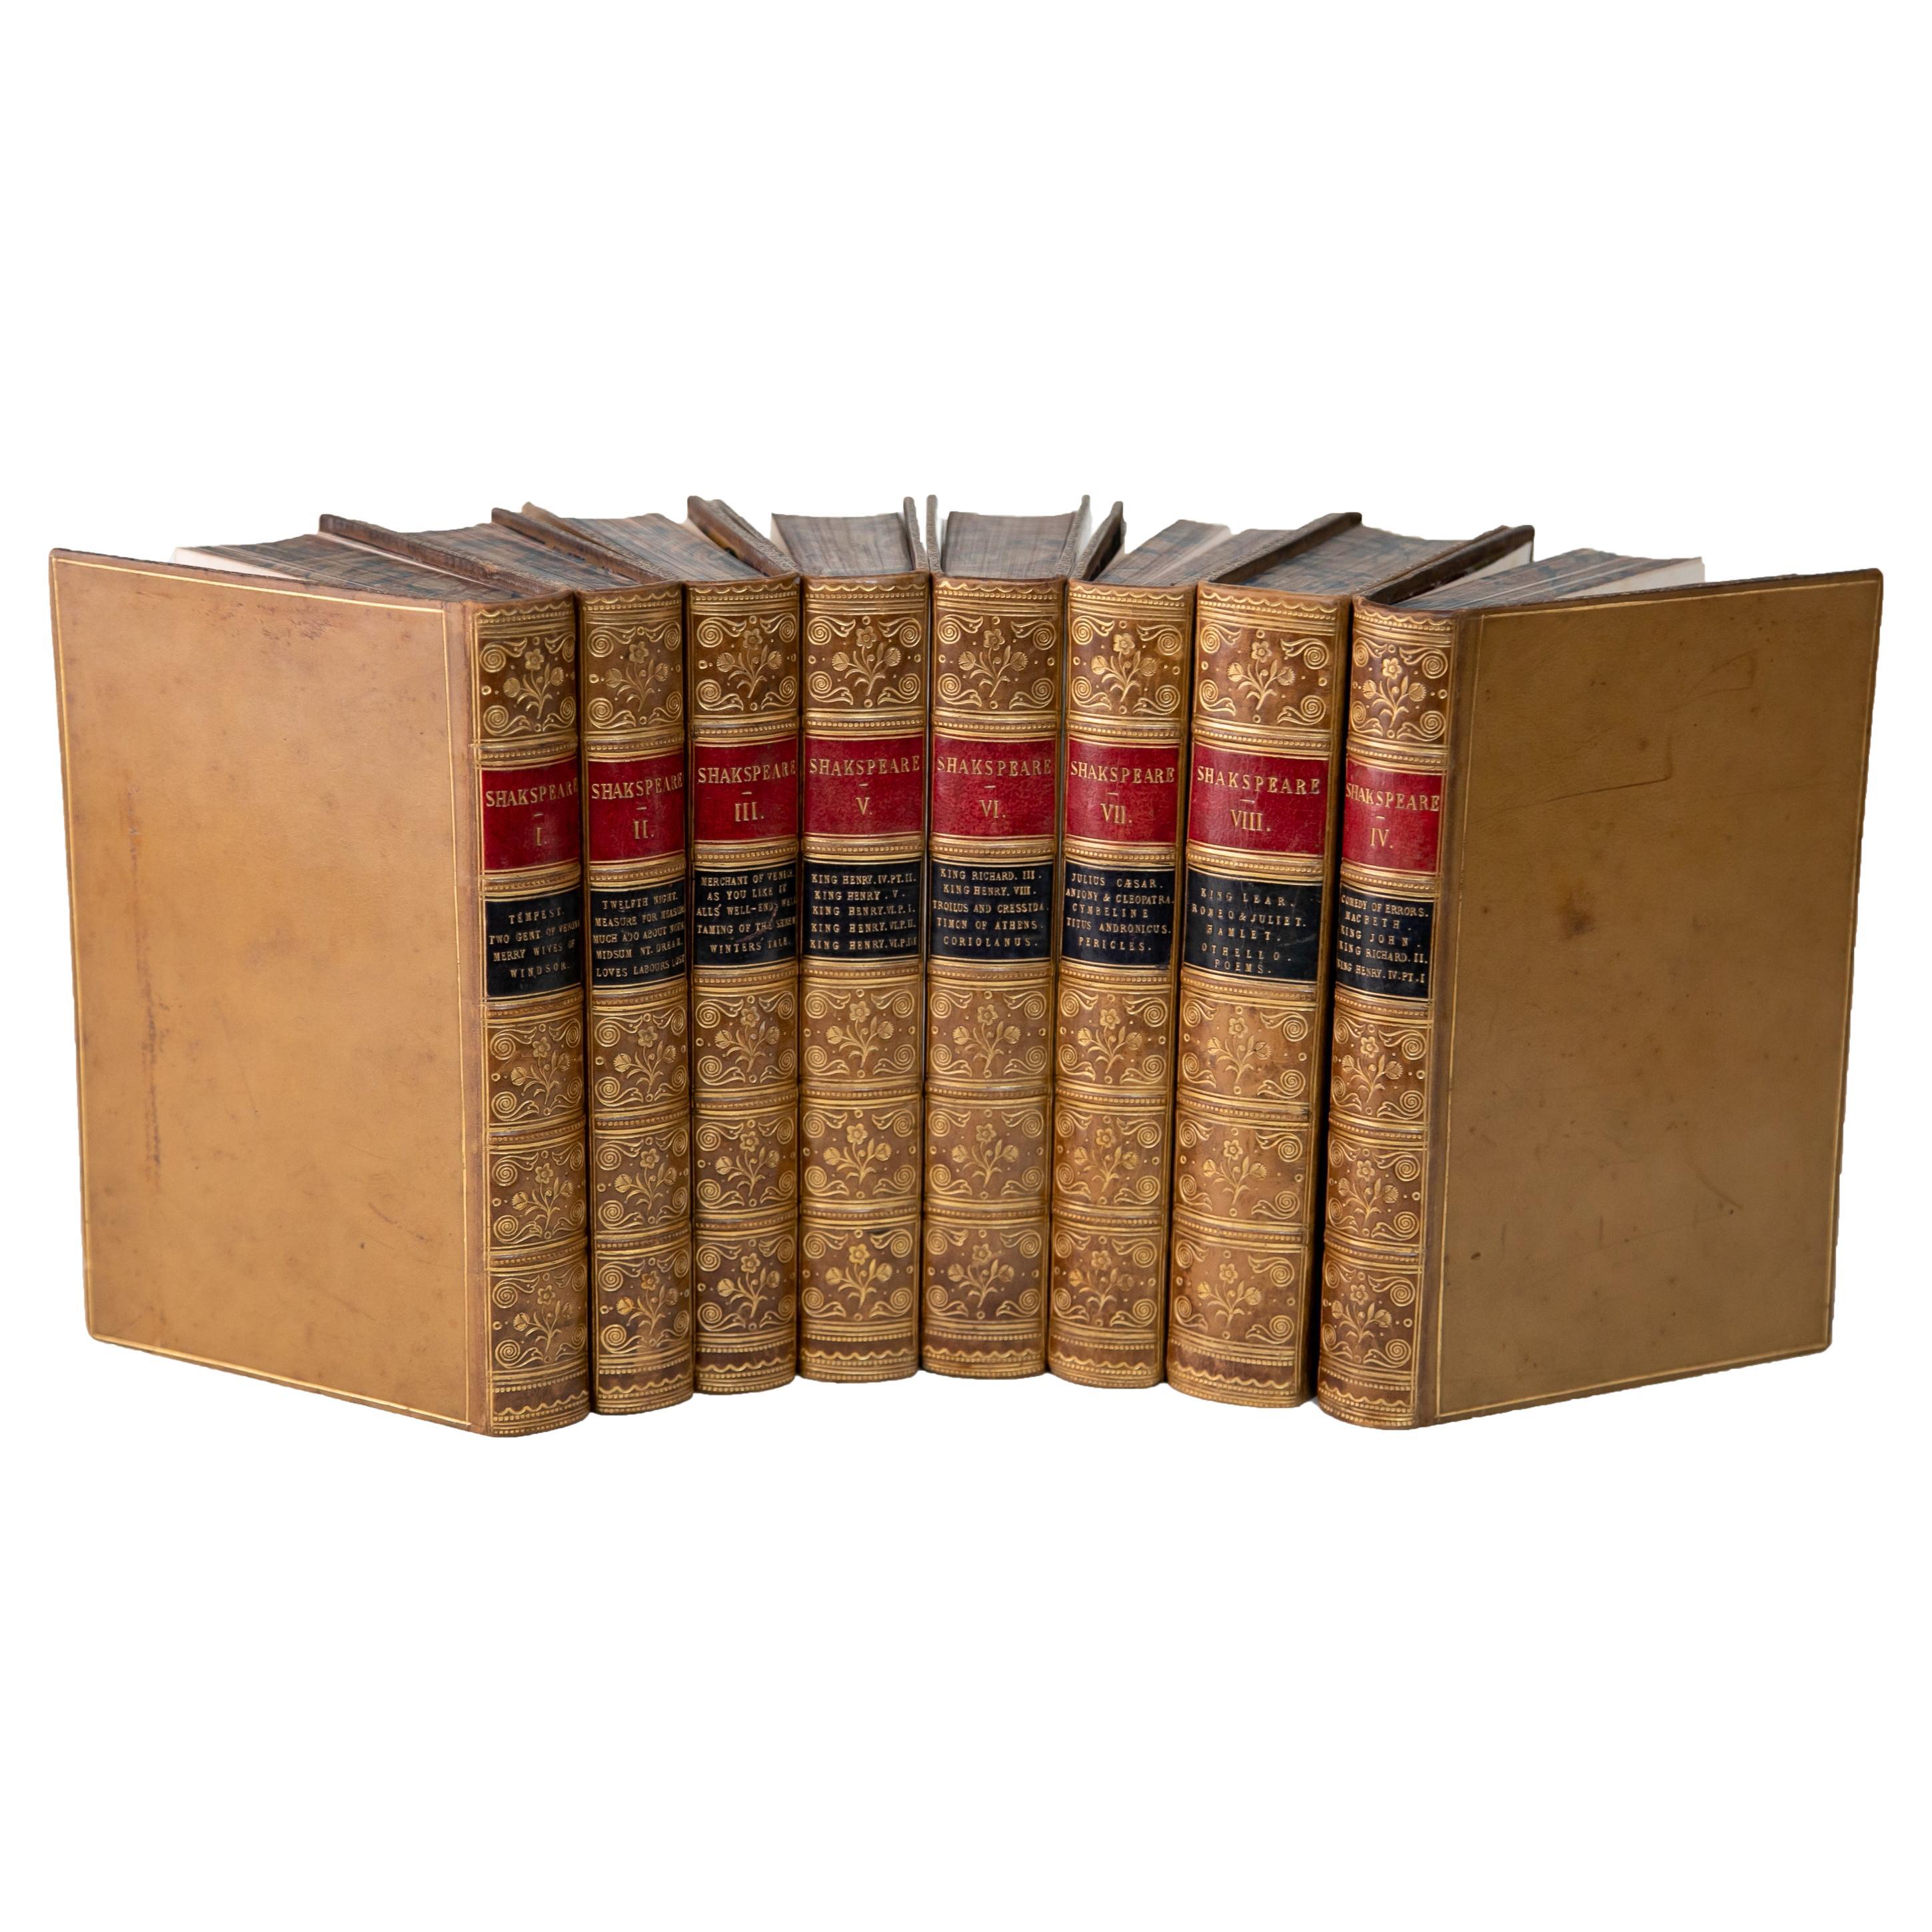 8 Volumes, William Shakespeare, the Dramatic Works